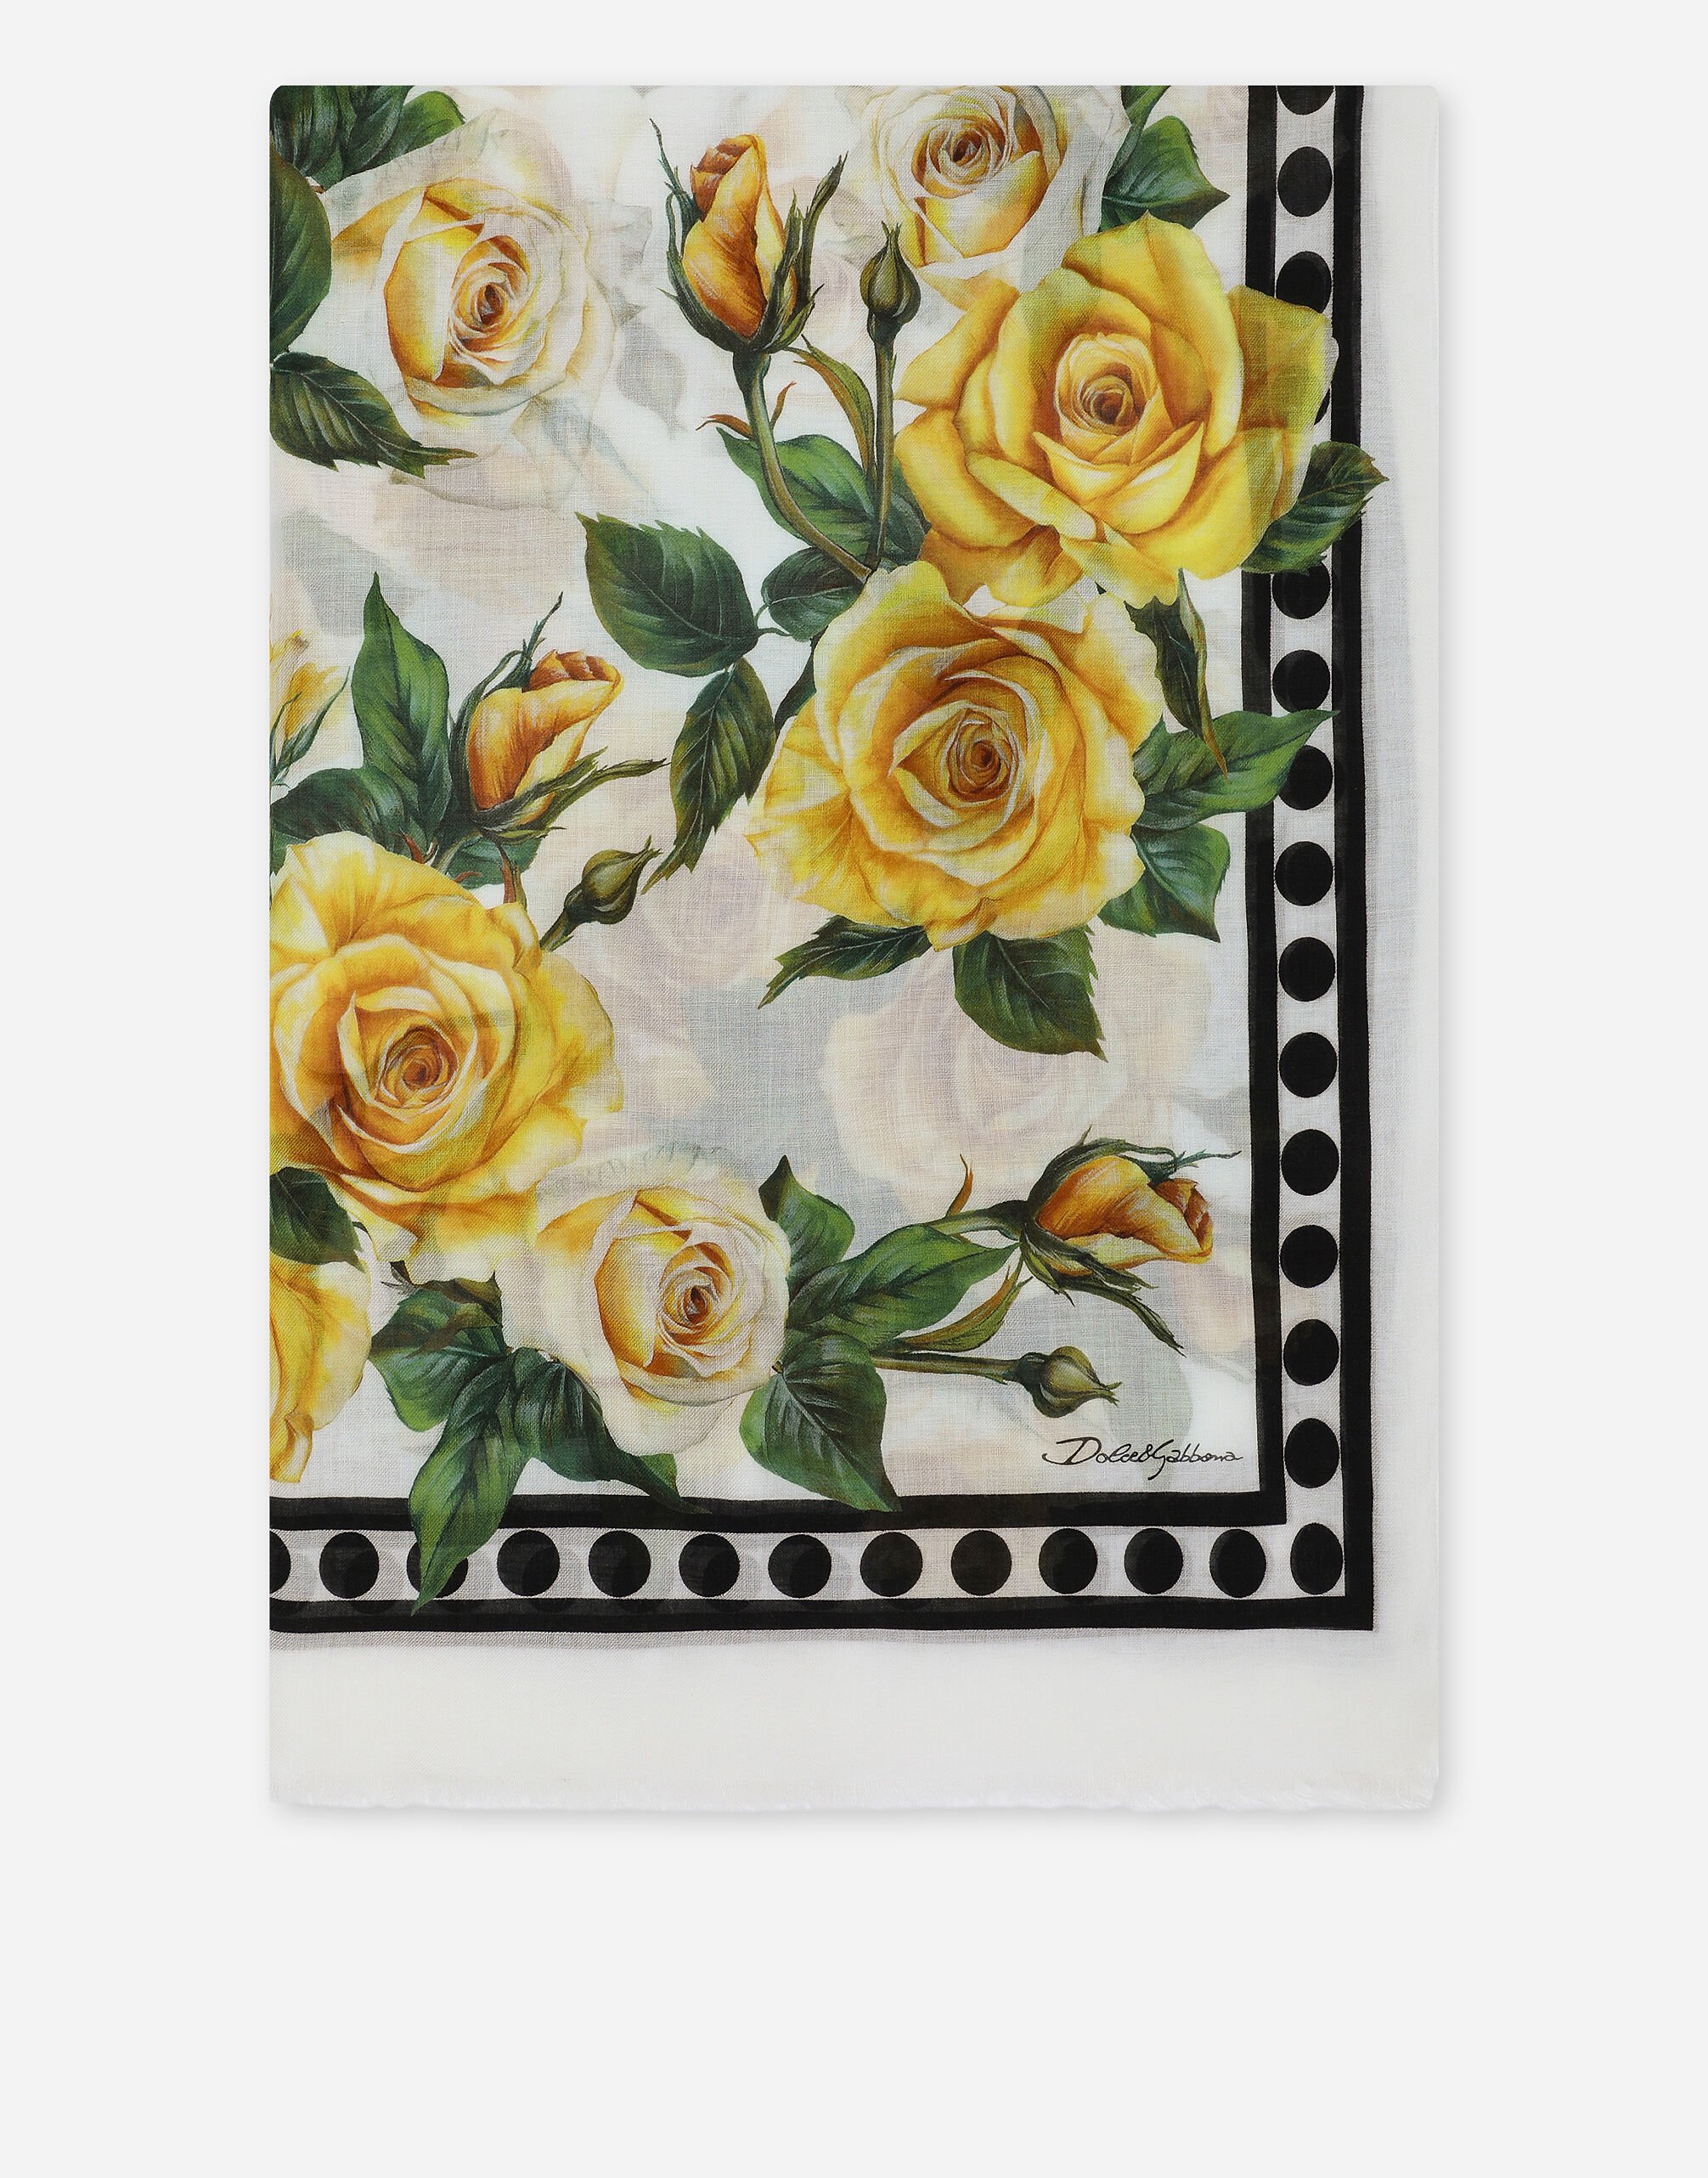 Dolce & Gabbana Modal and cashmere scarf with yellow rose print Print FN092RGDAWX